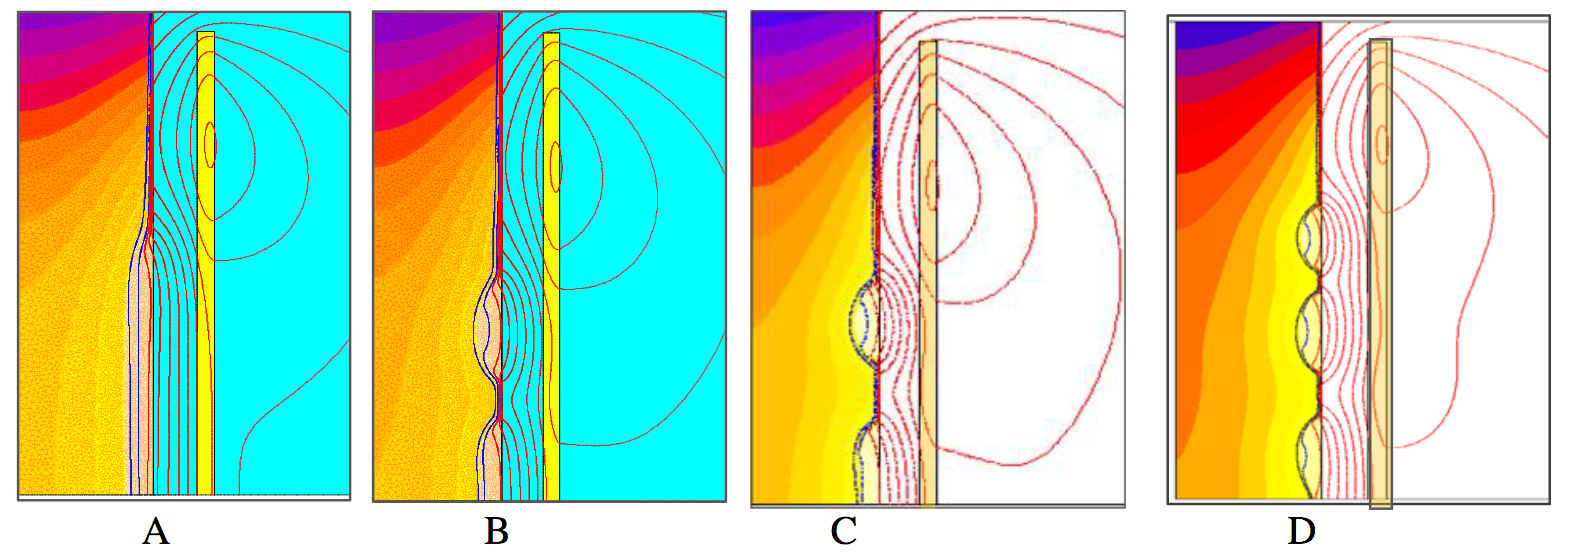 Fluxtrol - Striation Effect in Induction Heating: Myths and Reality - Figure 7